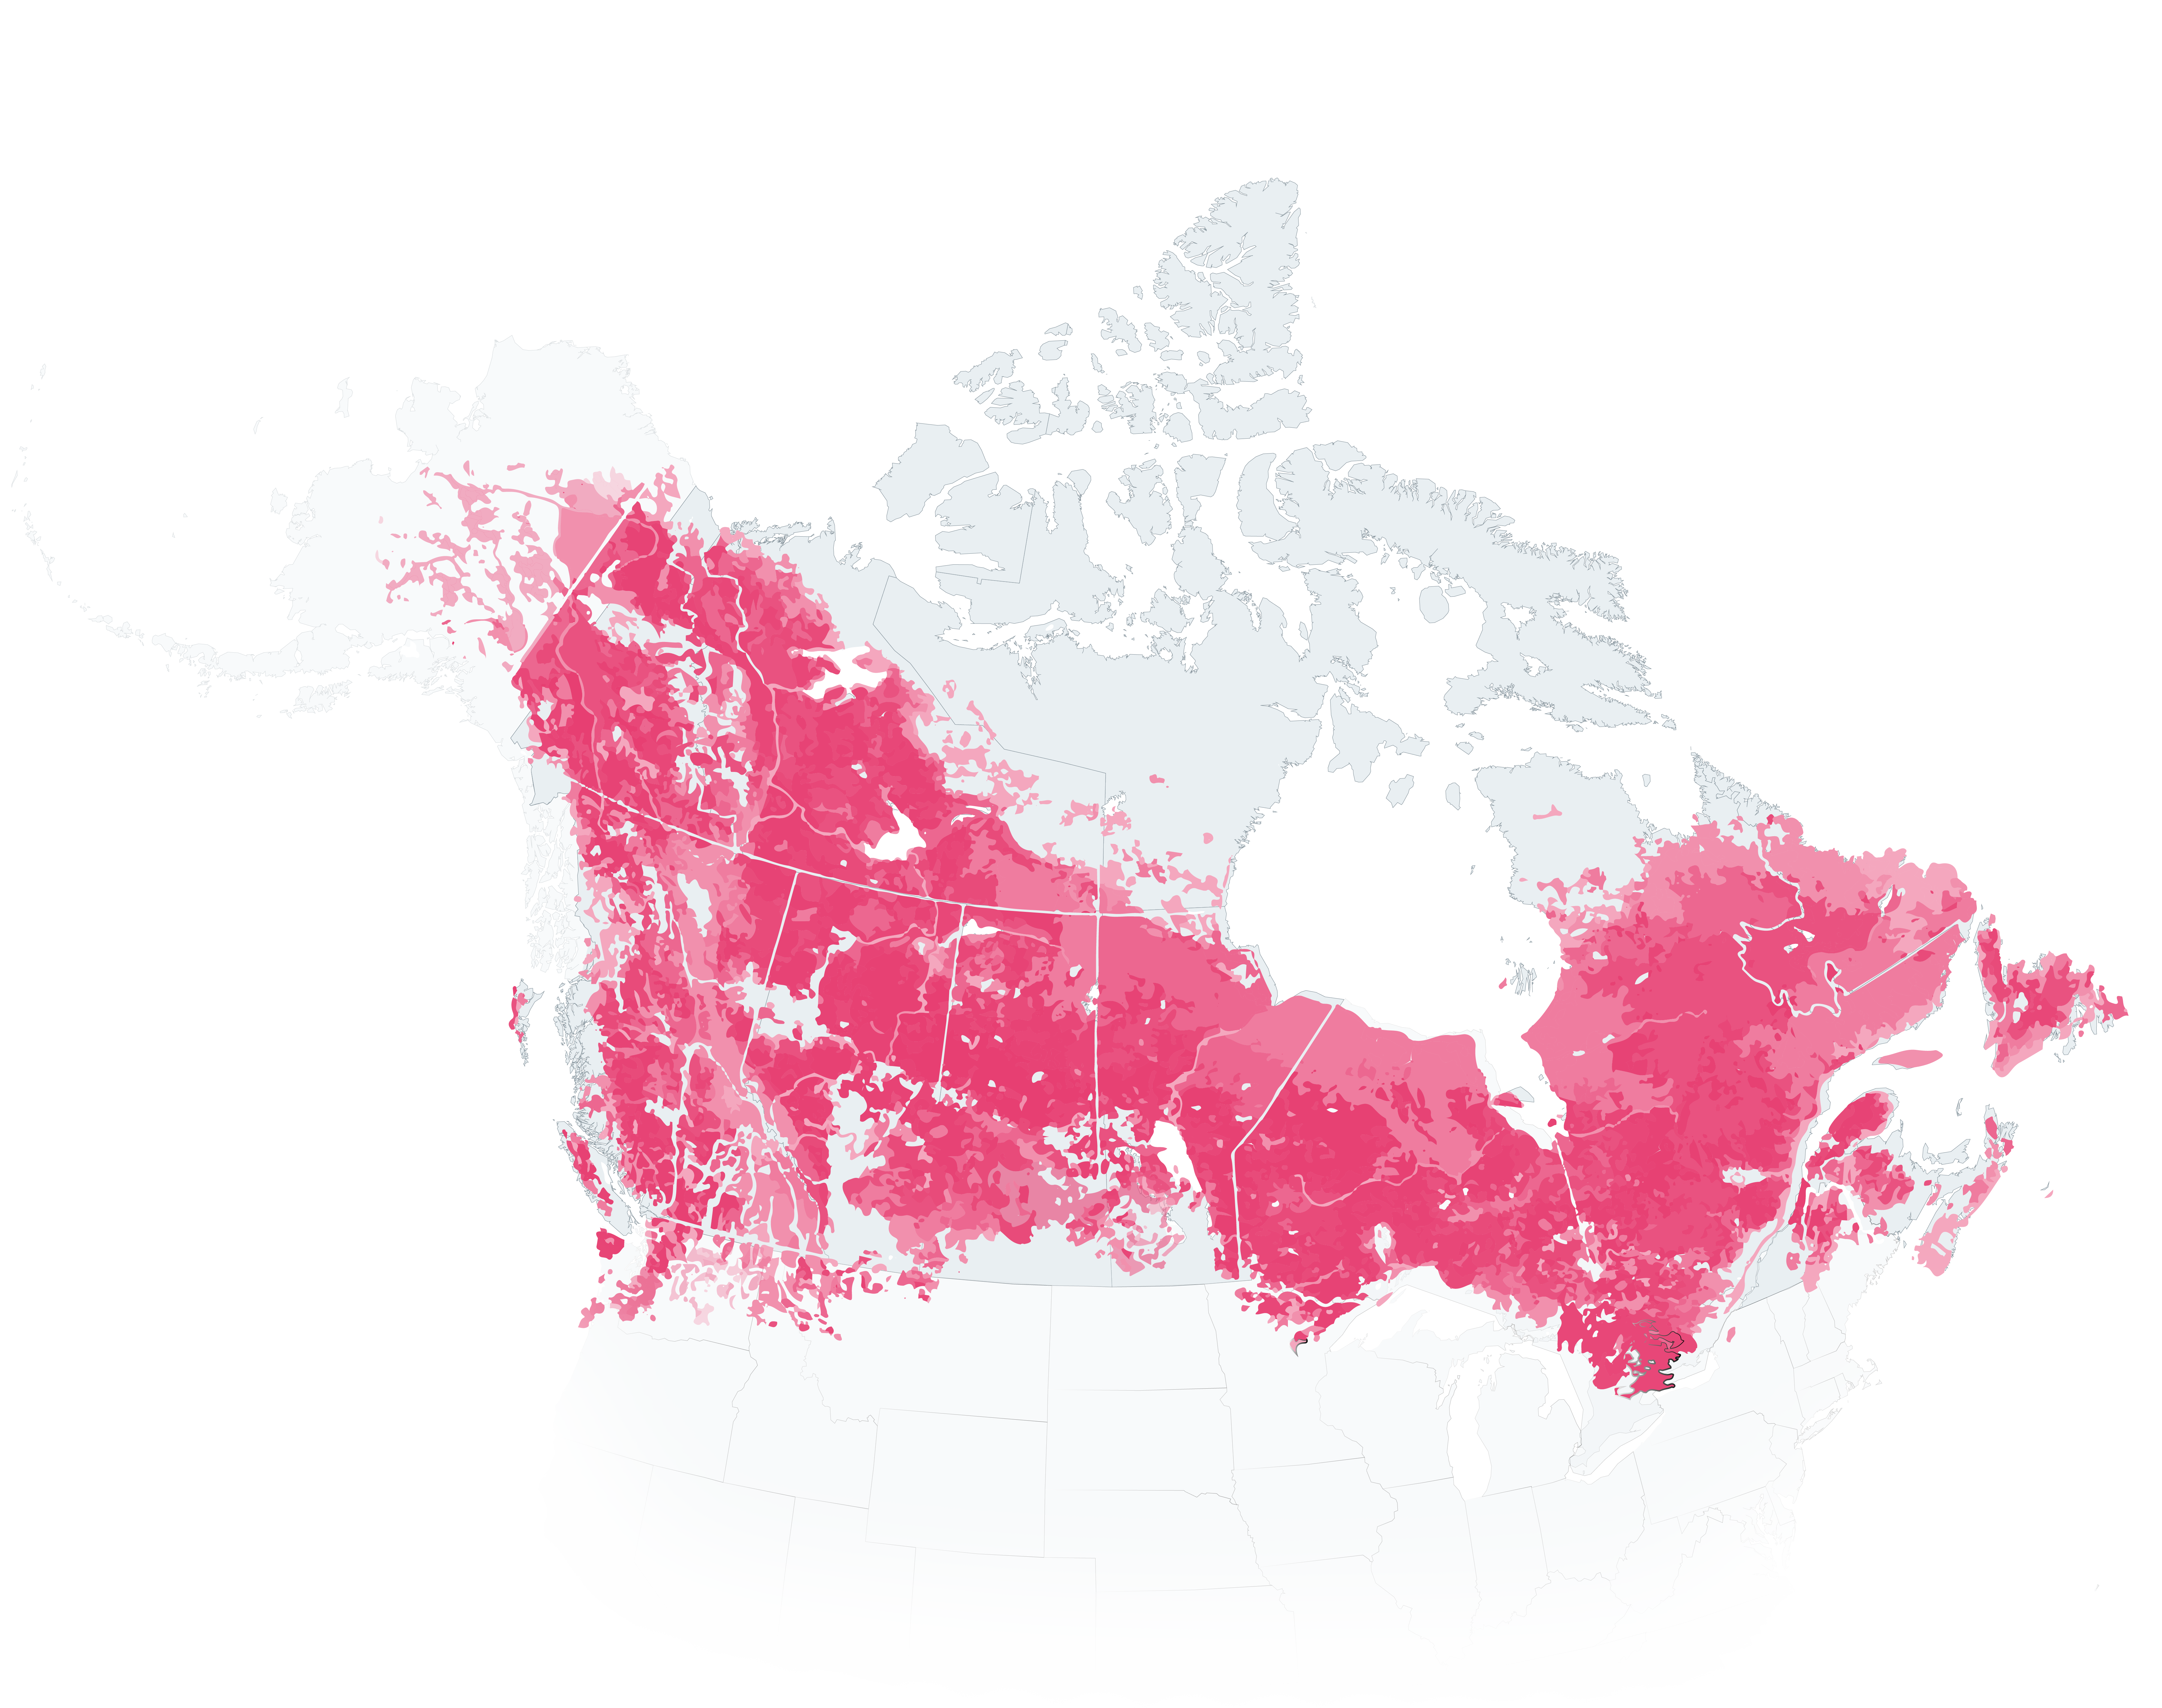 Colour-shaded data map of Canada.